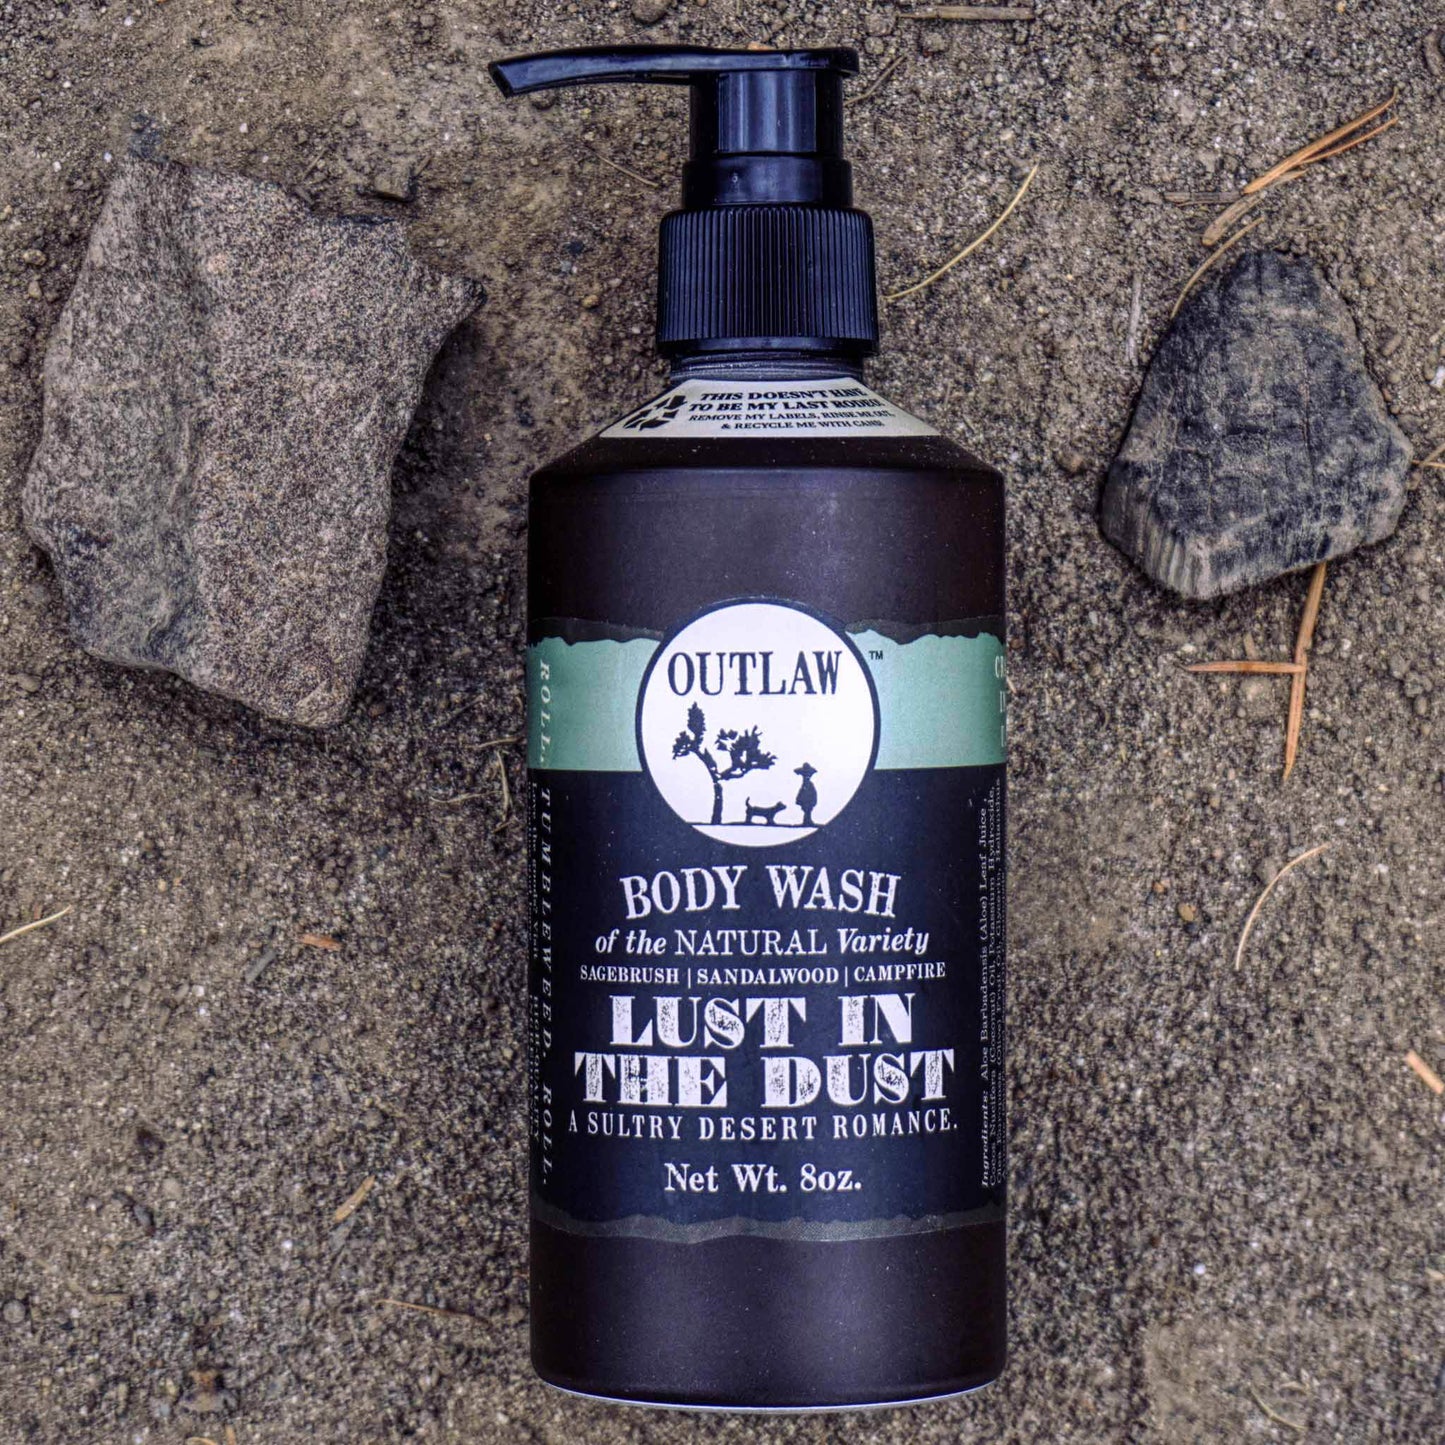 Lust in the Dust sagebrush and campfire scented natural body wash by Outlaw